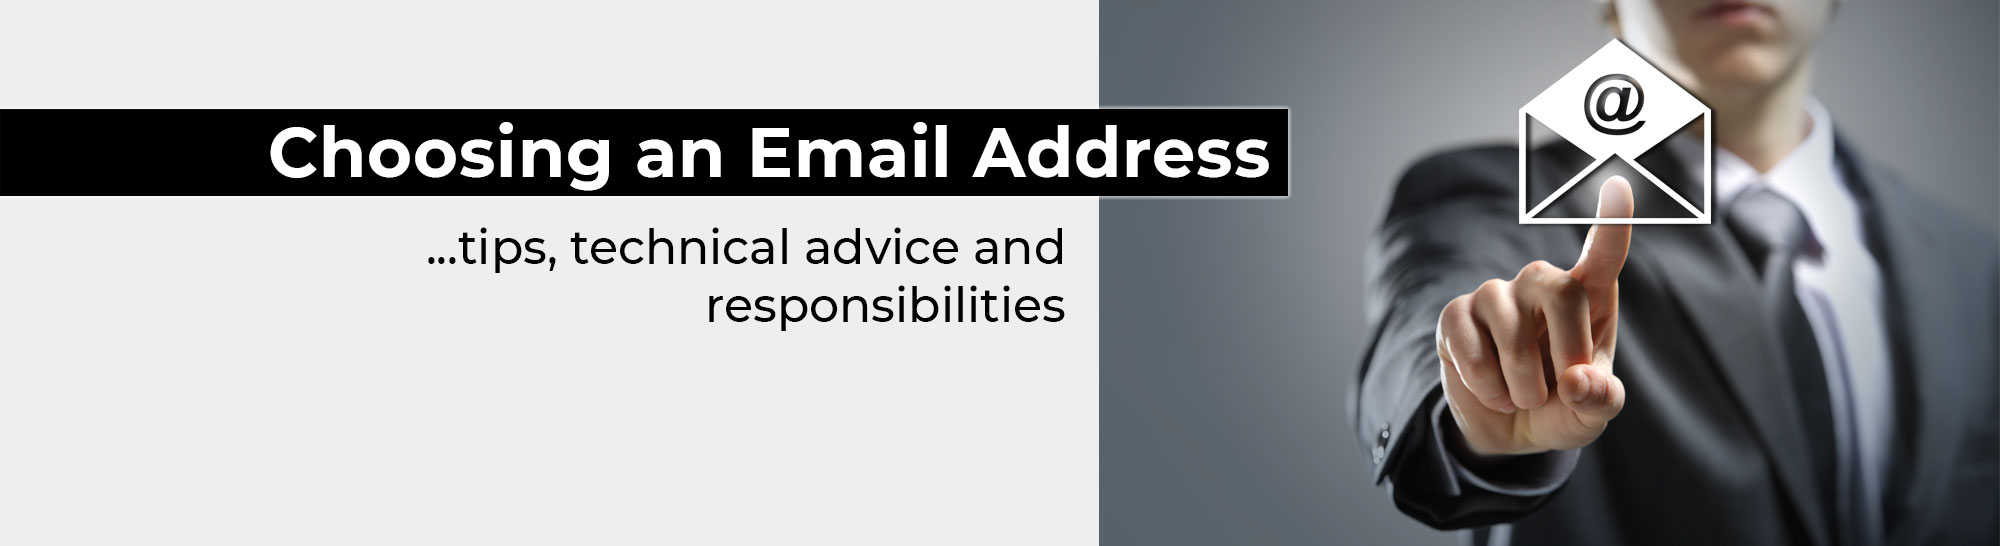 How to Choose an Email Address